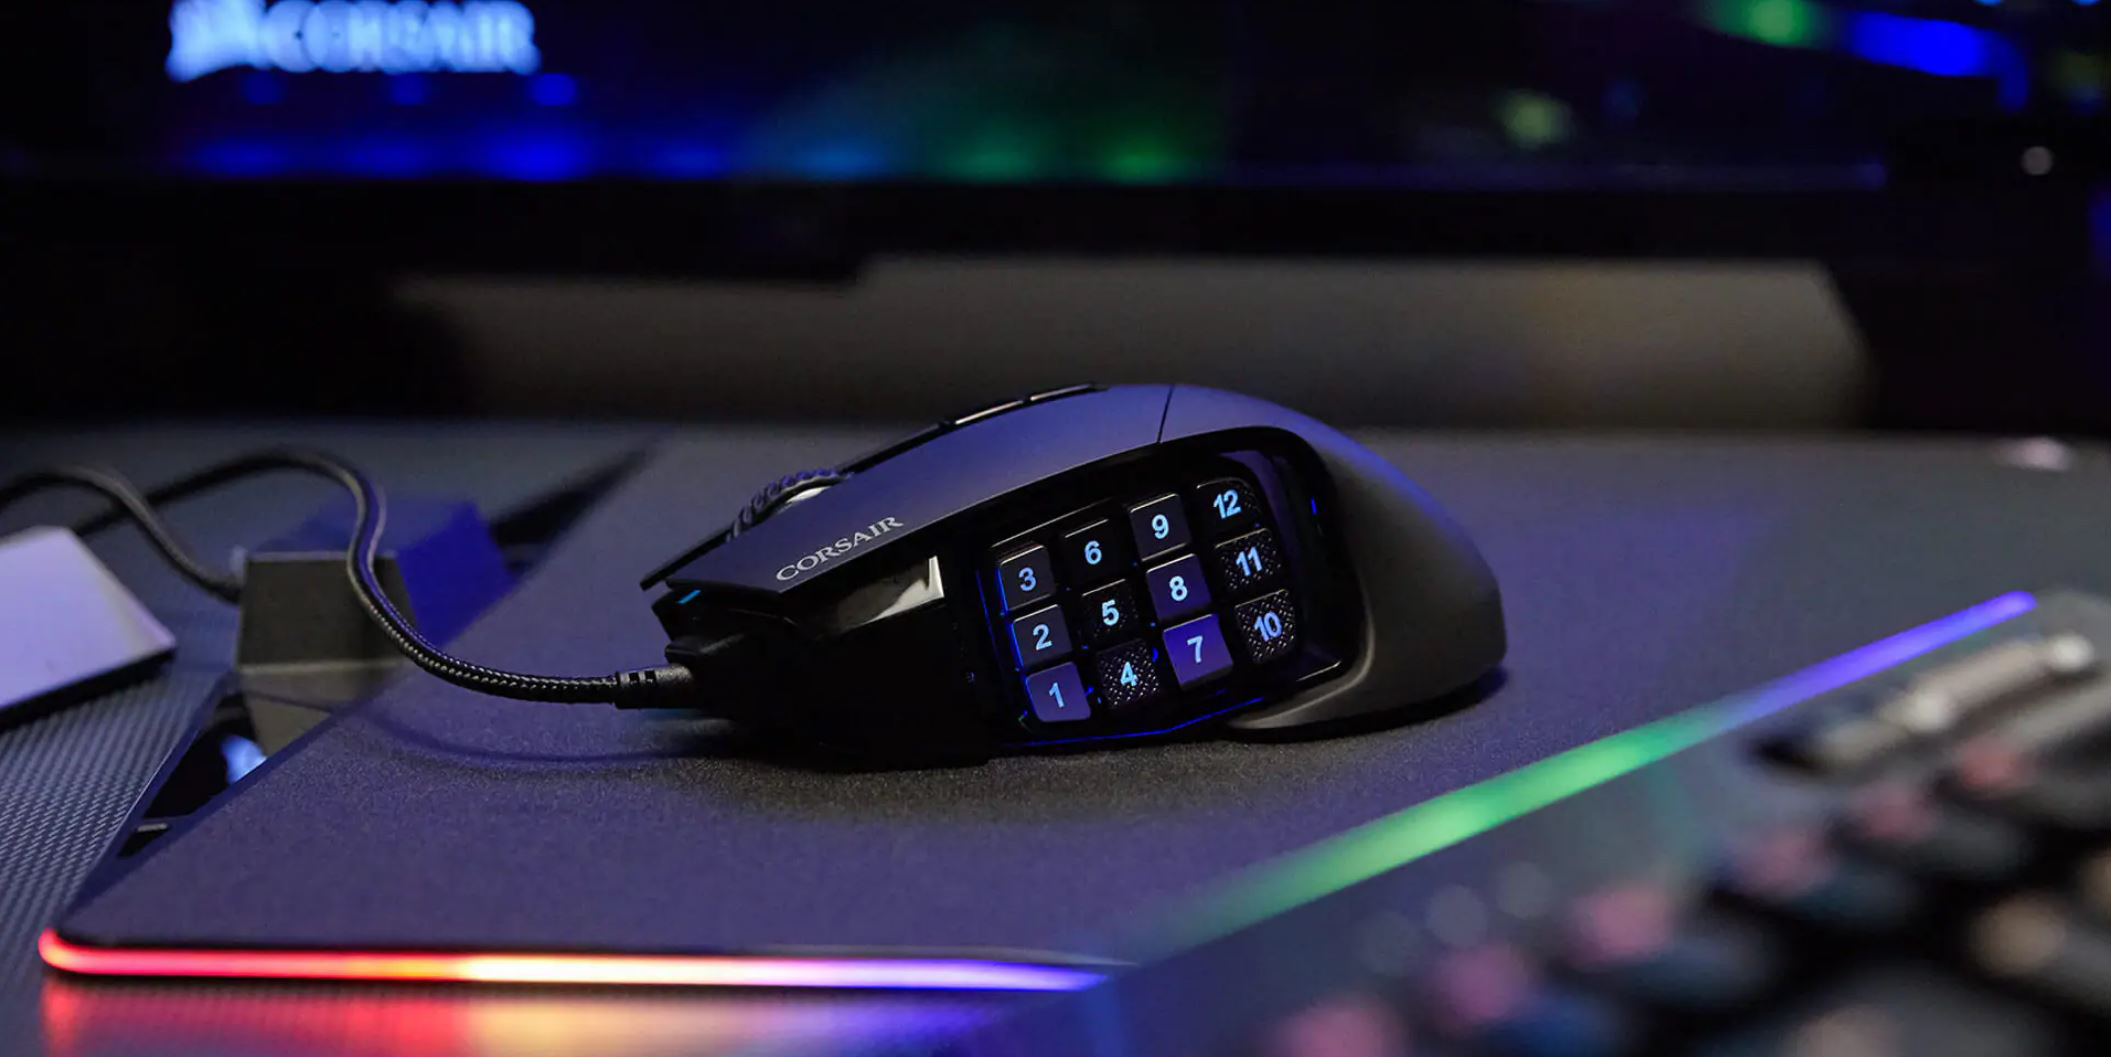 SCIMITAR PRO MMO GAMING MOUSE